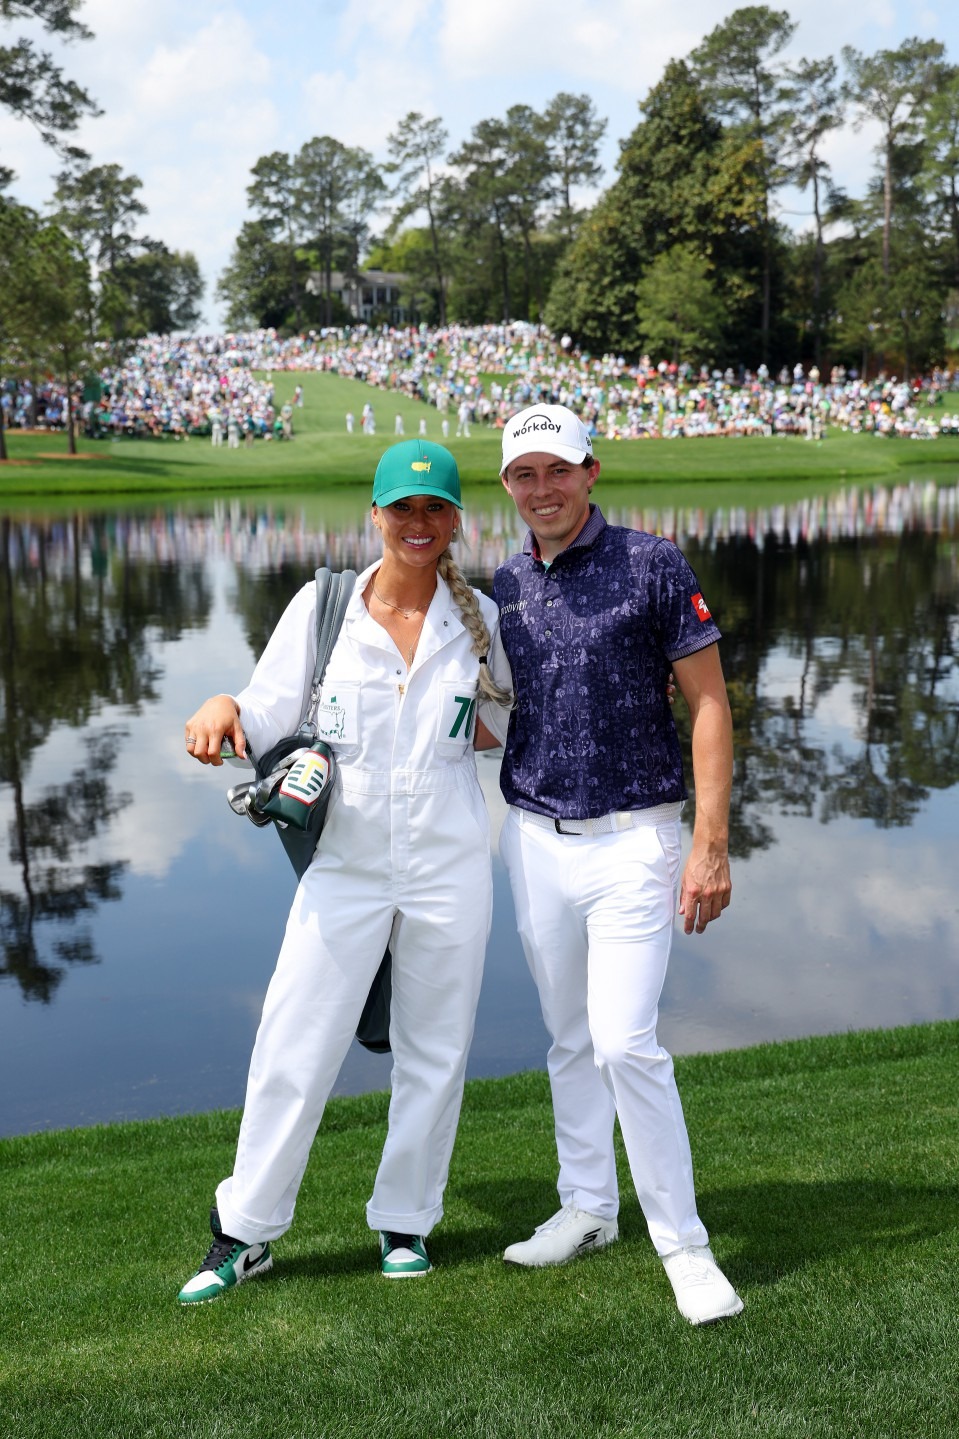 AUGUSTA, GEORGIA - APRIL 05: Matt Fitzpatrick of England poses with his girlfriend Katherine Gaal during the Par 3 contest prior to the 2023 Masters Tournament at Augusta National Golf Club on April 05, 2023 in Augusta, Georgia. (Photo by Andrew Redington/Getty Images)